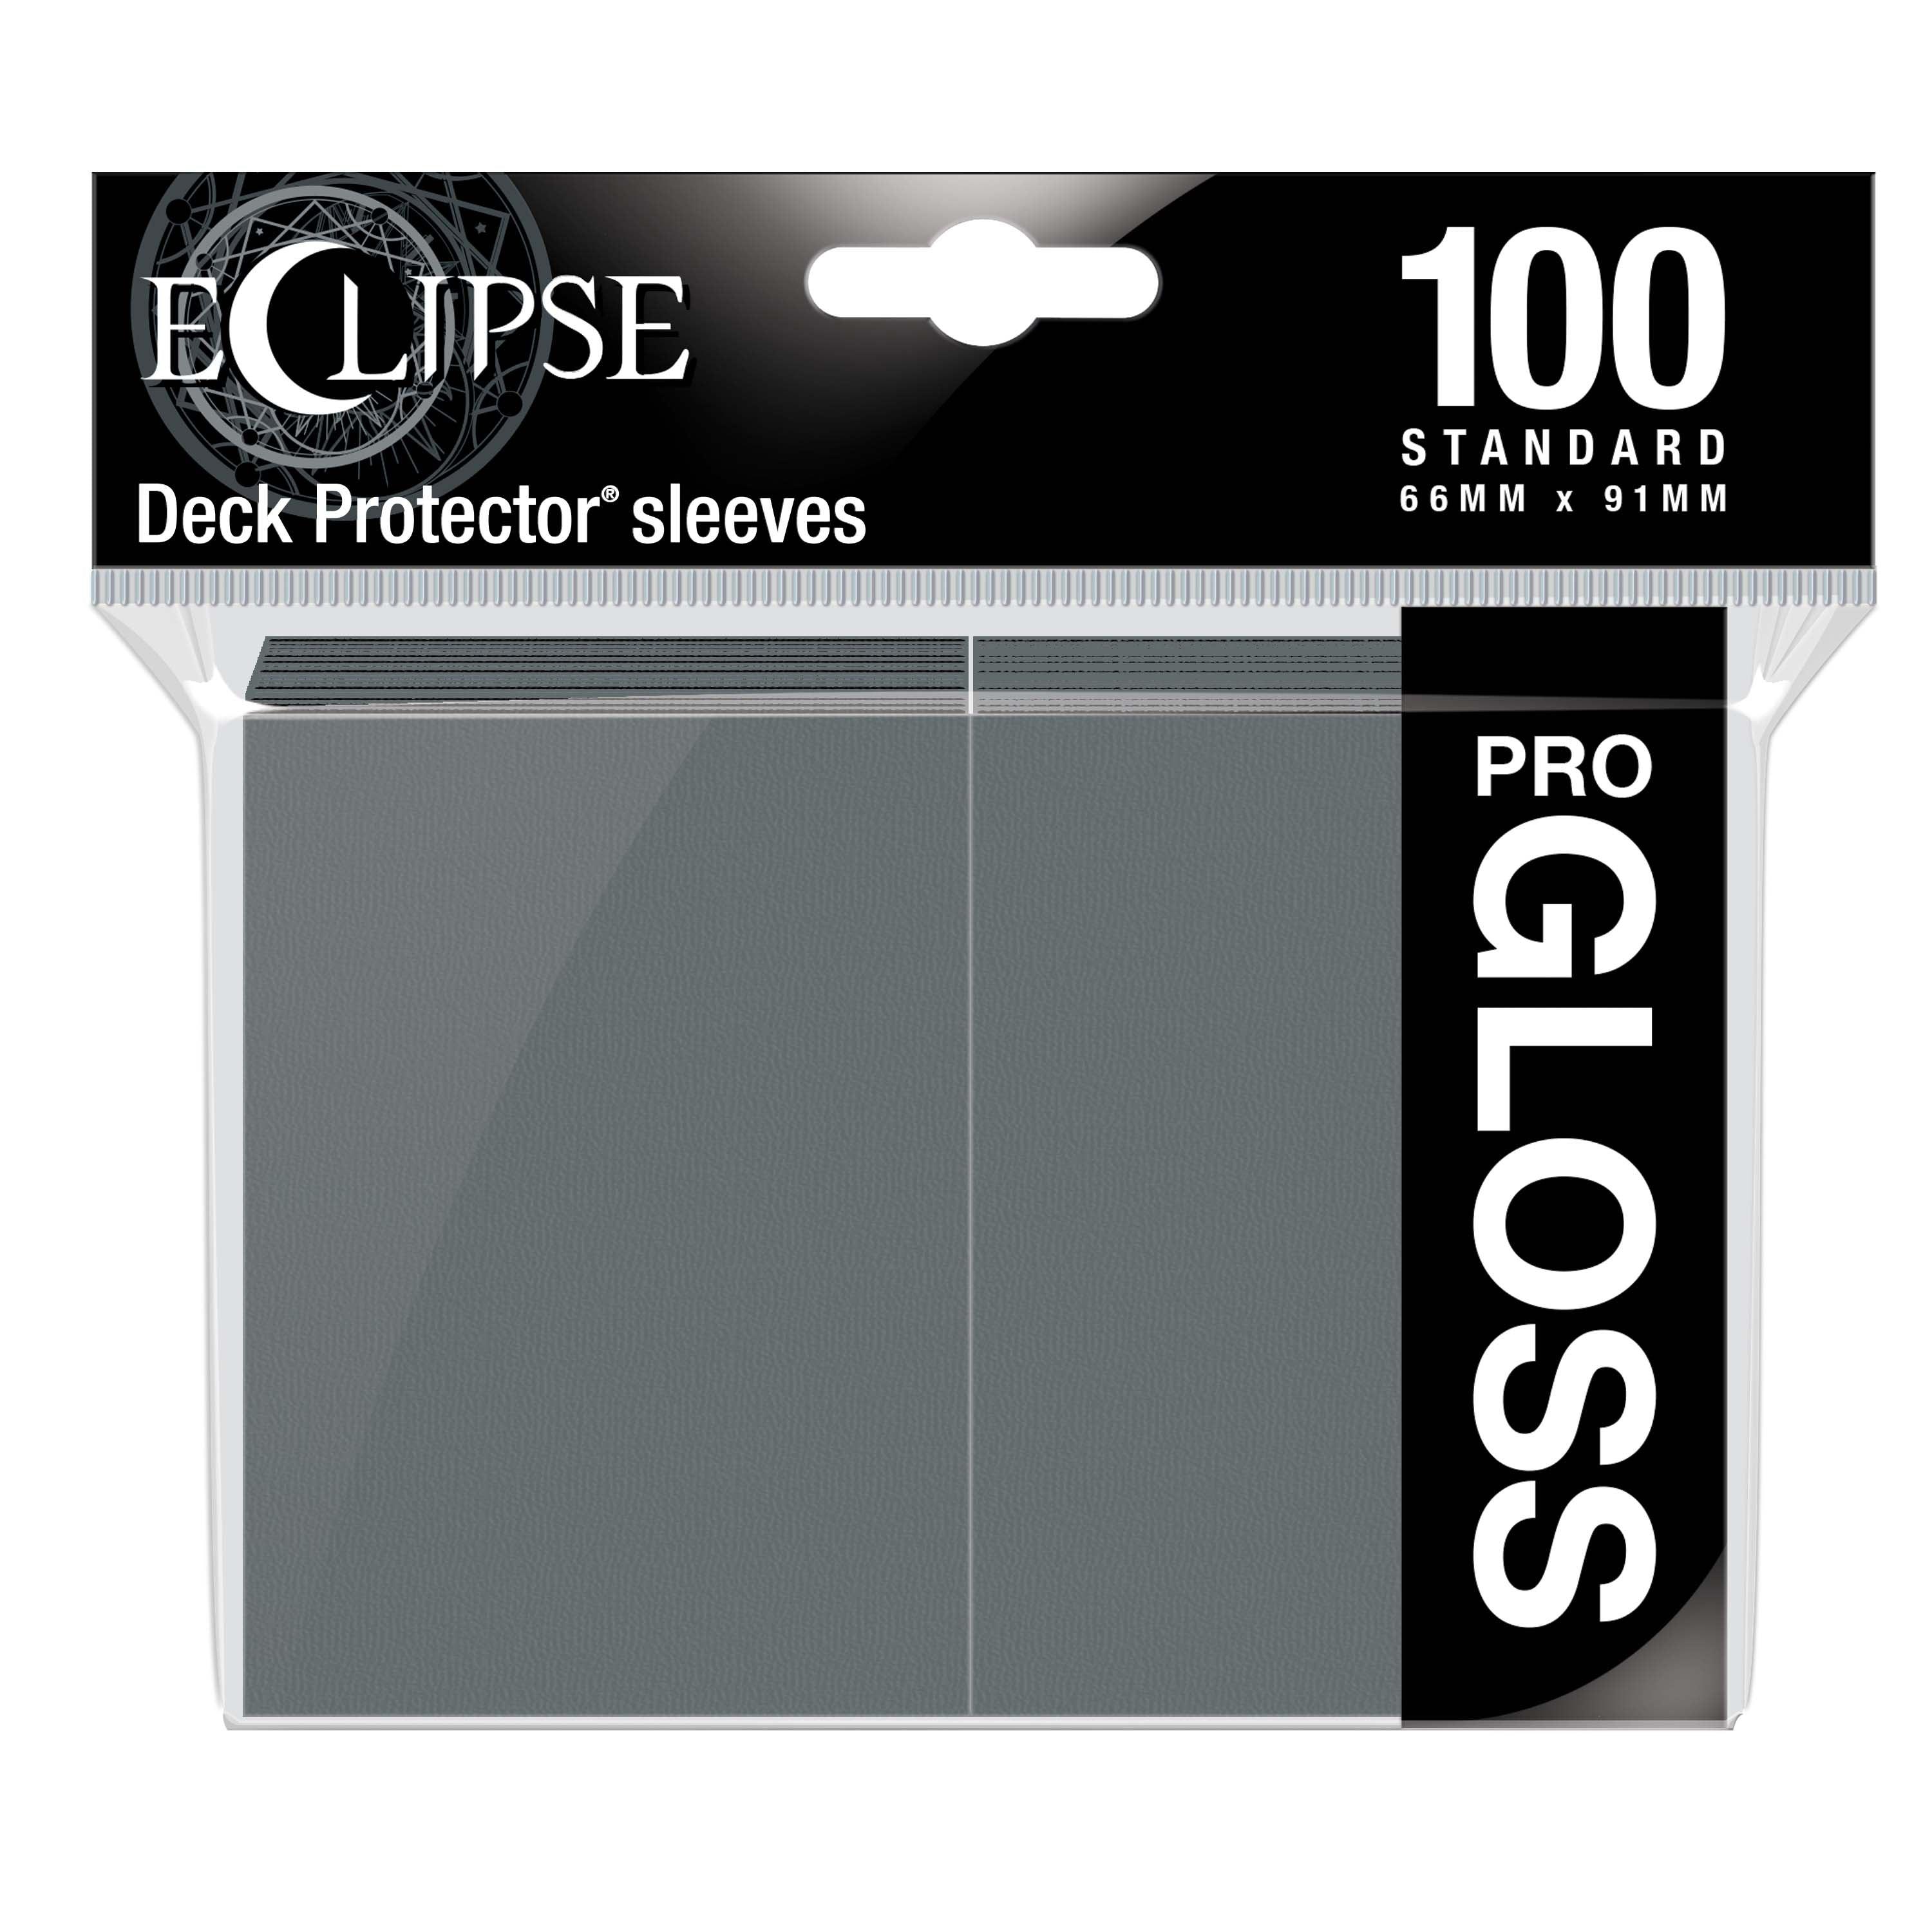 Ultra Pro Eclipse Gloss Standard Size Sleeves 100-Count - Josh's Cards